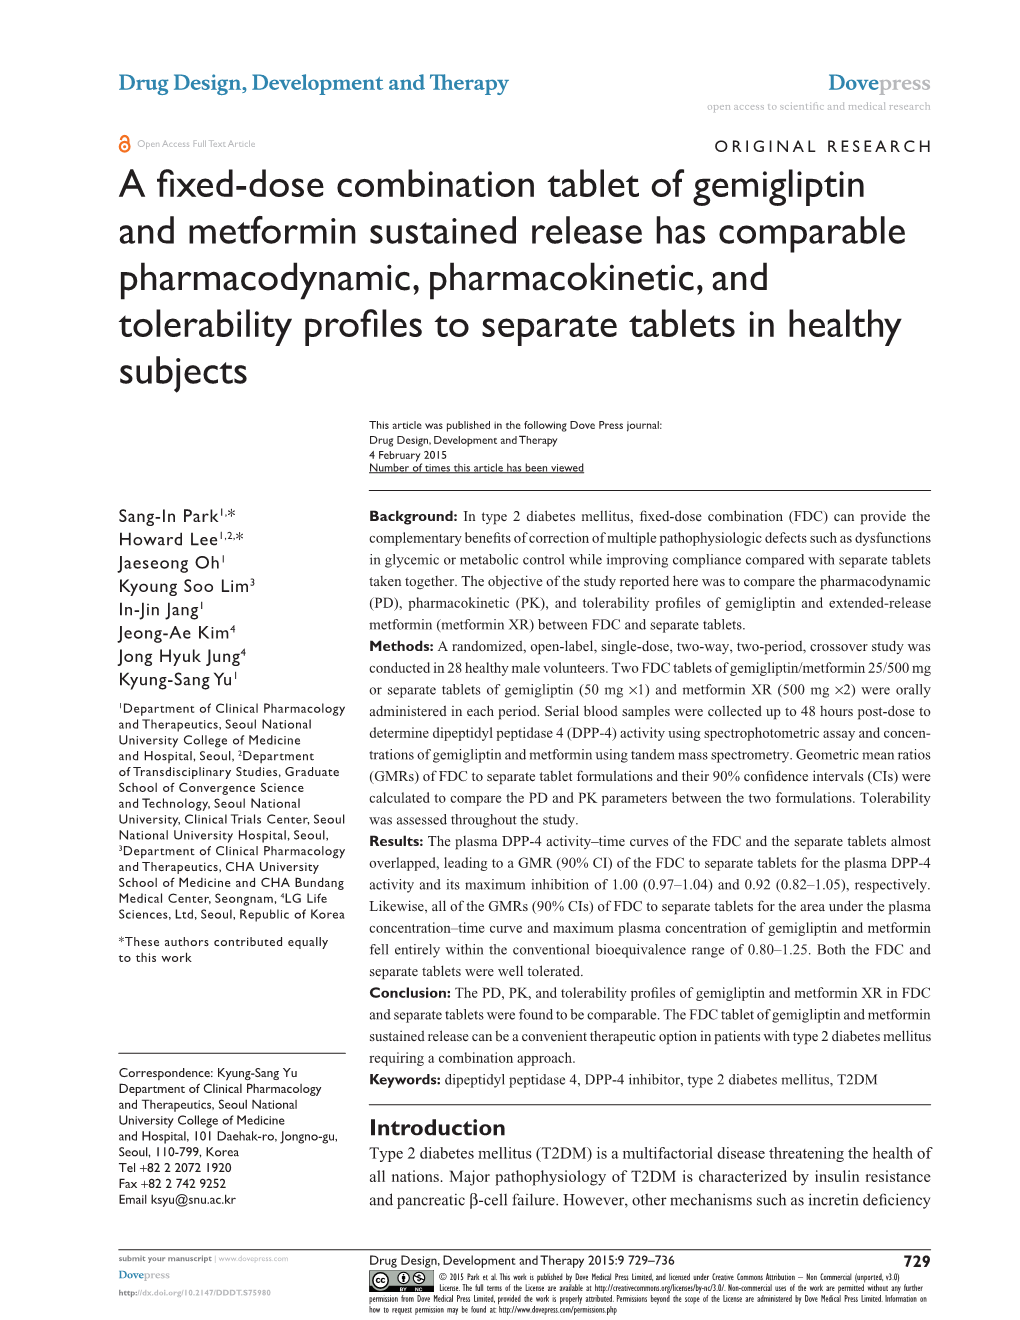 A Fixed-Dose Combination Tablet of Gemigliptin And